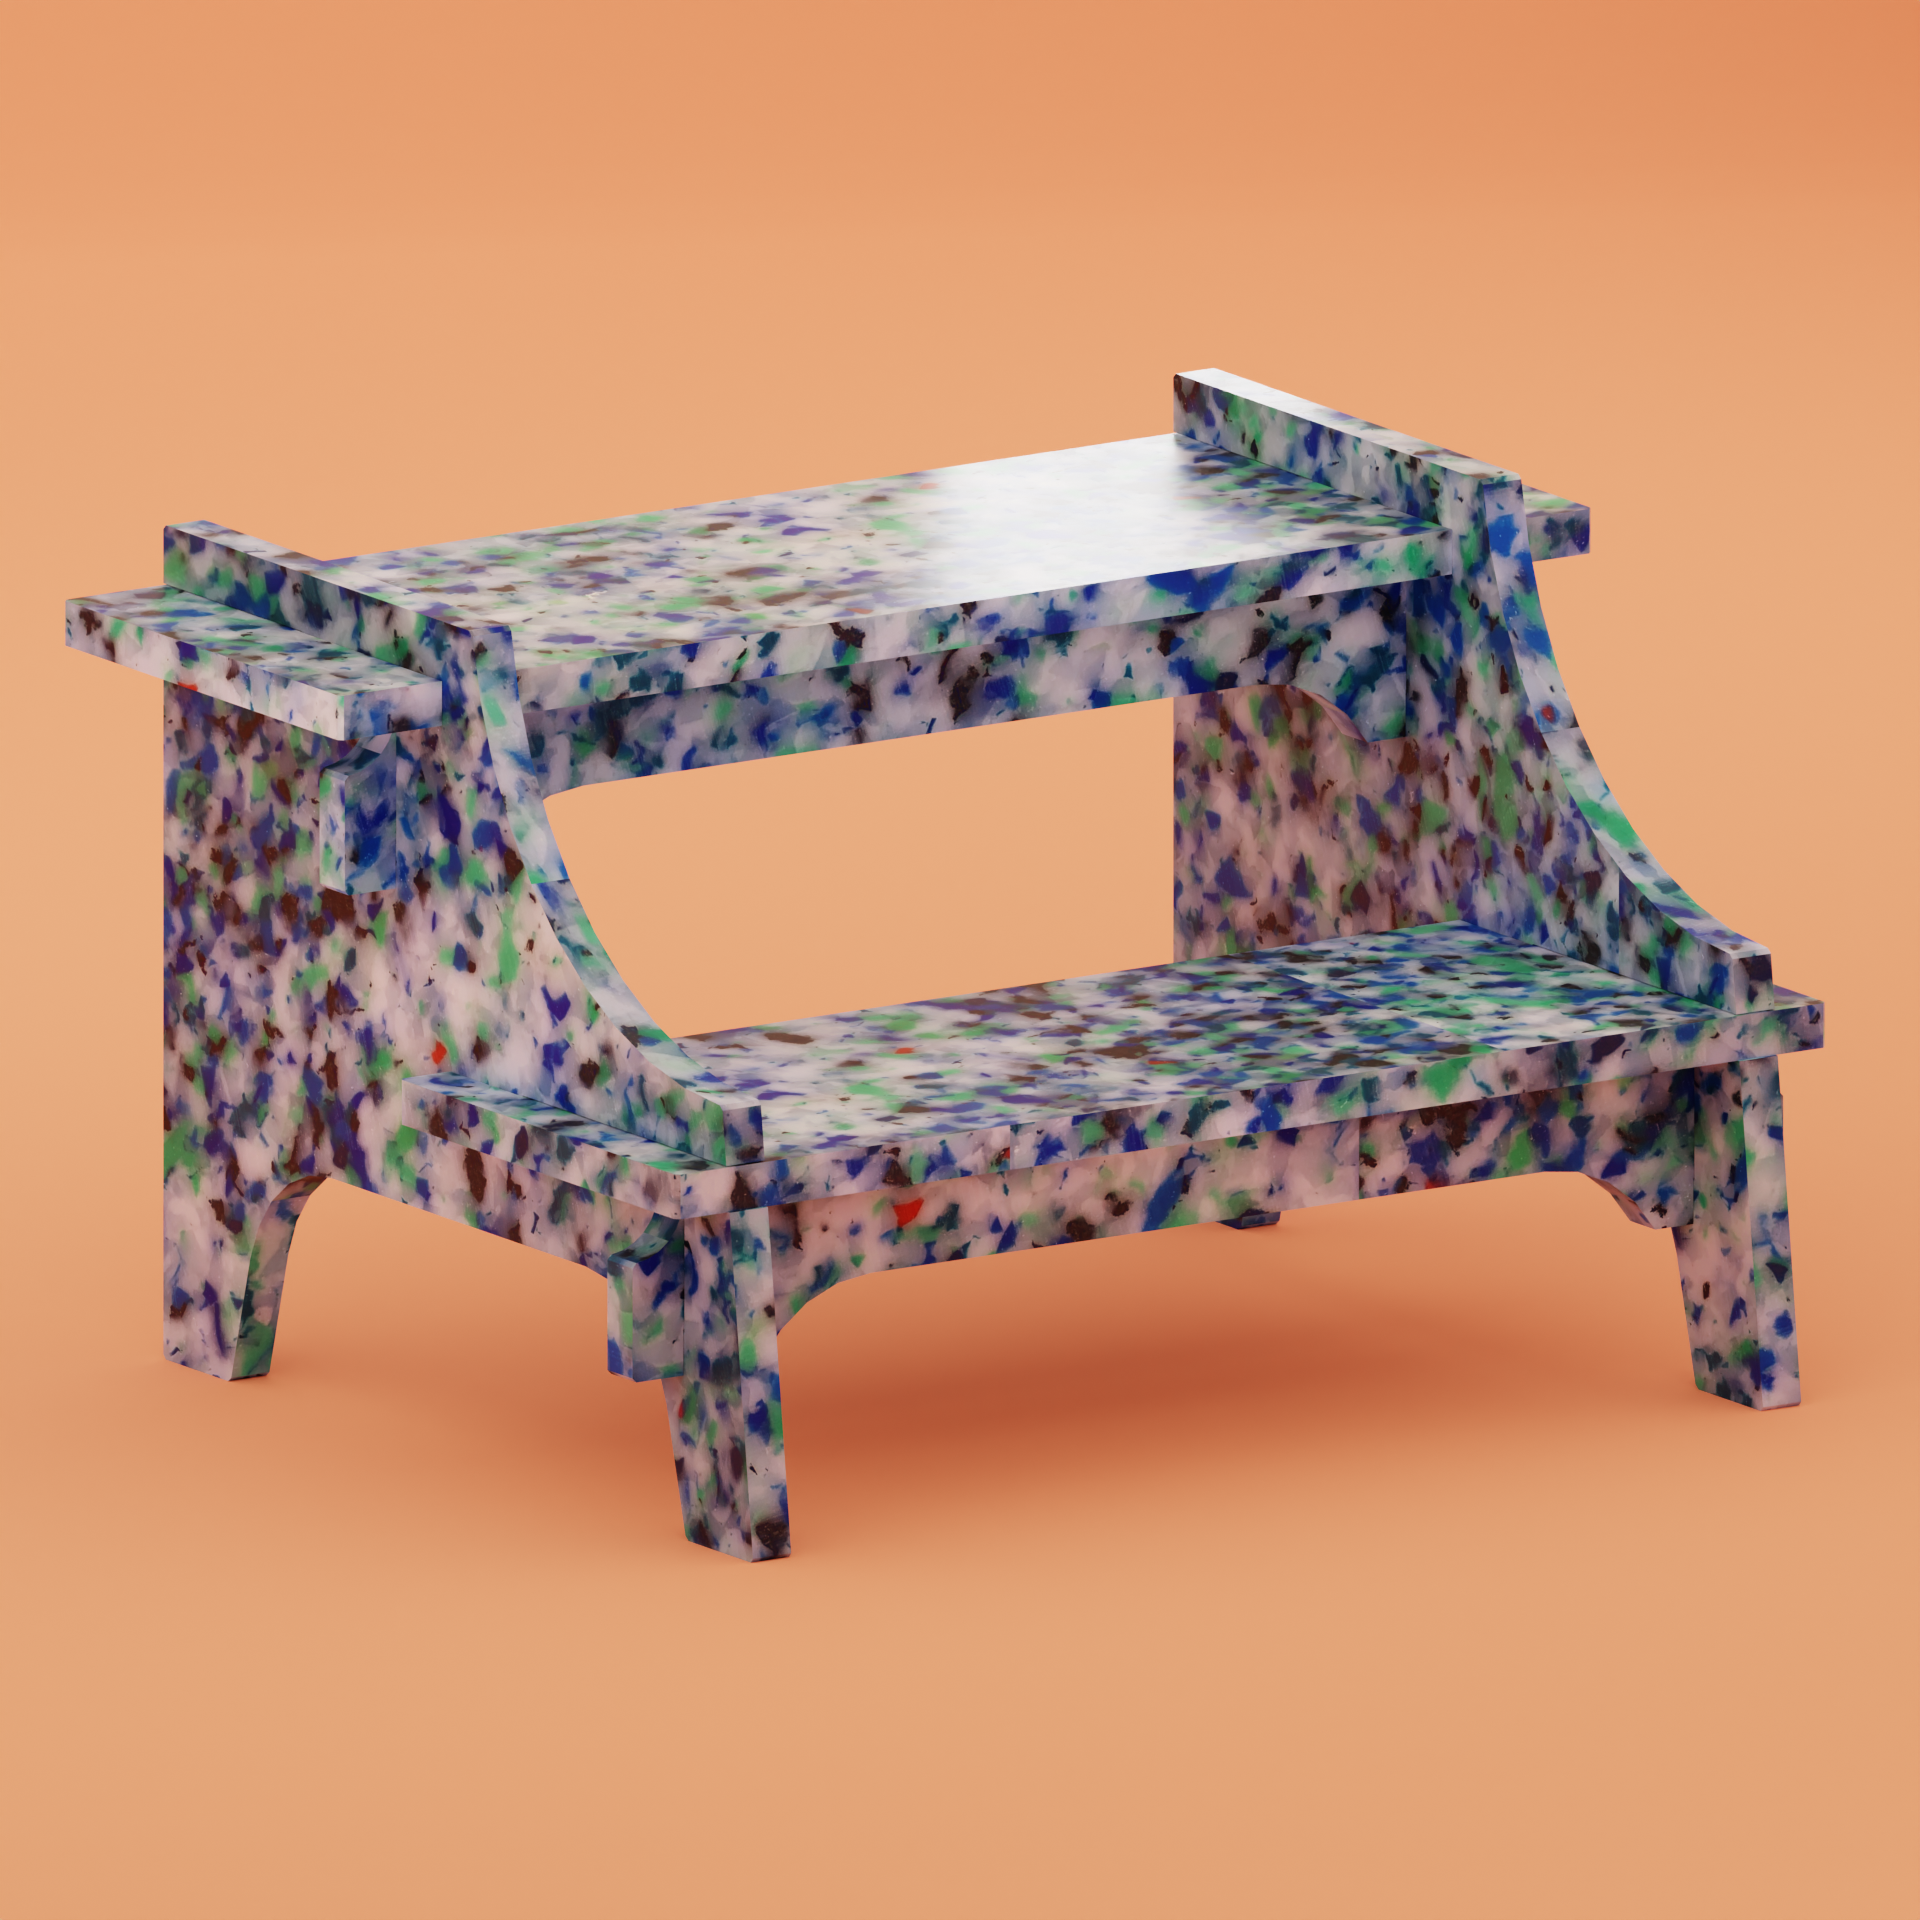 RENDER OF BLUE STEP STOOL BY THE MINIMONO PROJECT - BRAND FOR ECO FRIENDLY - PLAYFUL - MULTI FUNCTIONAL - SUSTAINABLE - HIGH QUALITY - DESIGN FURNITURE FROM RECYCLED PLASTIC FOR BOTH ADULT AND CHILDREN MADE IN BERLIN GERMANY